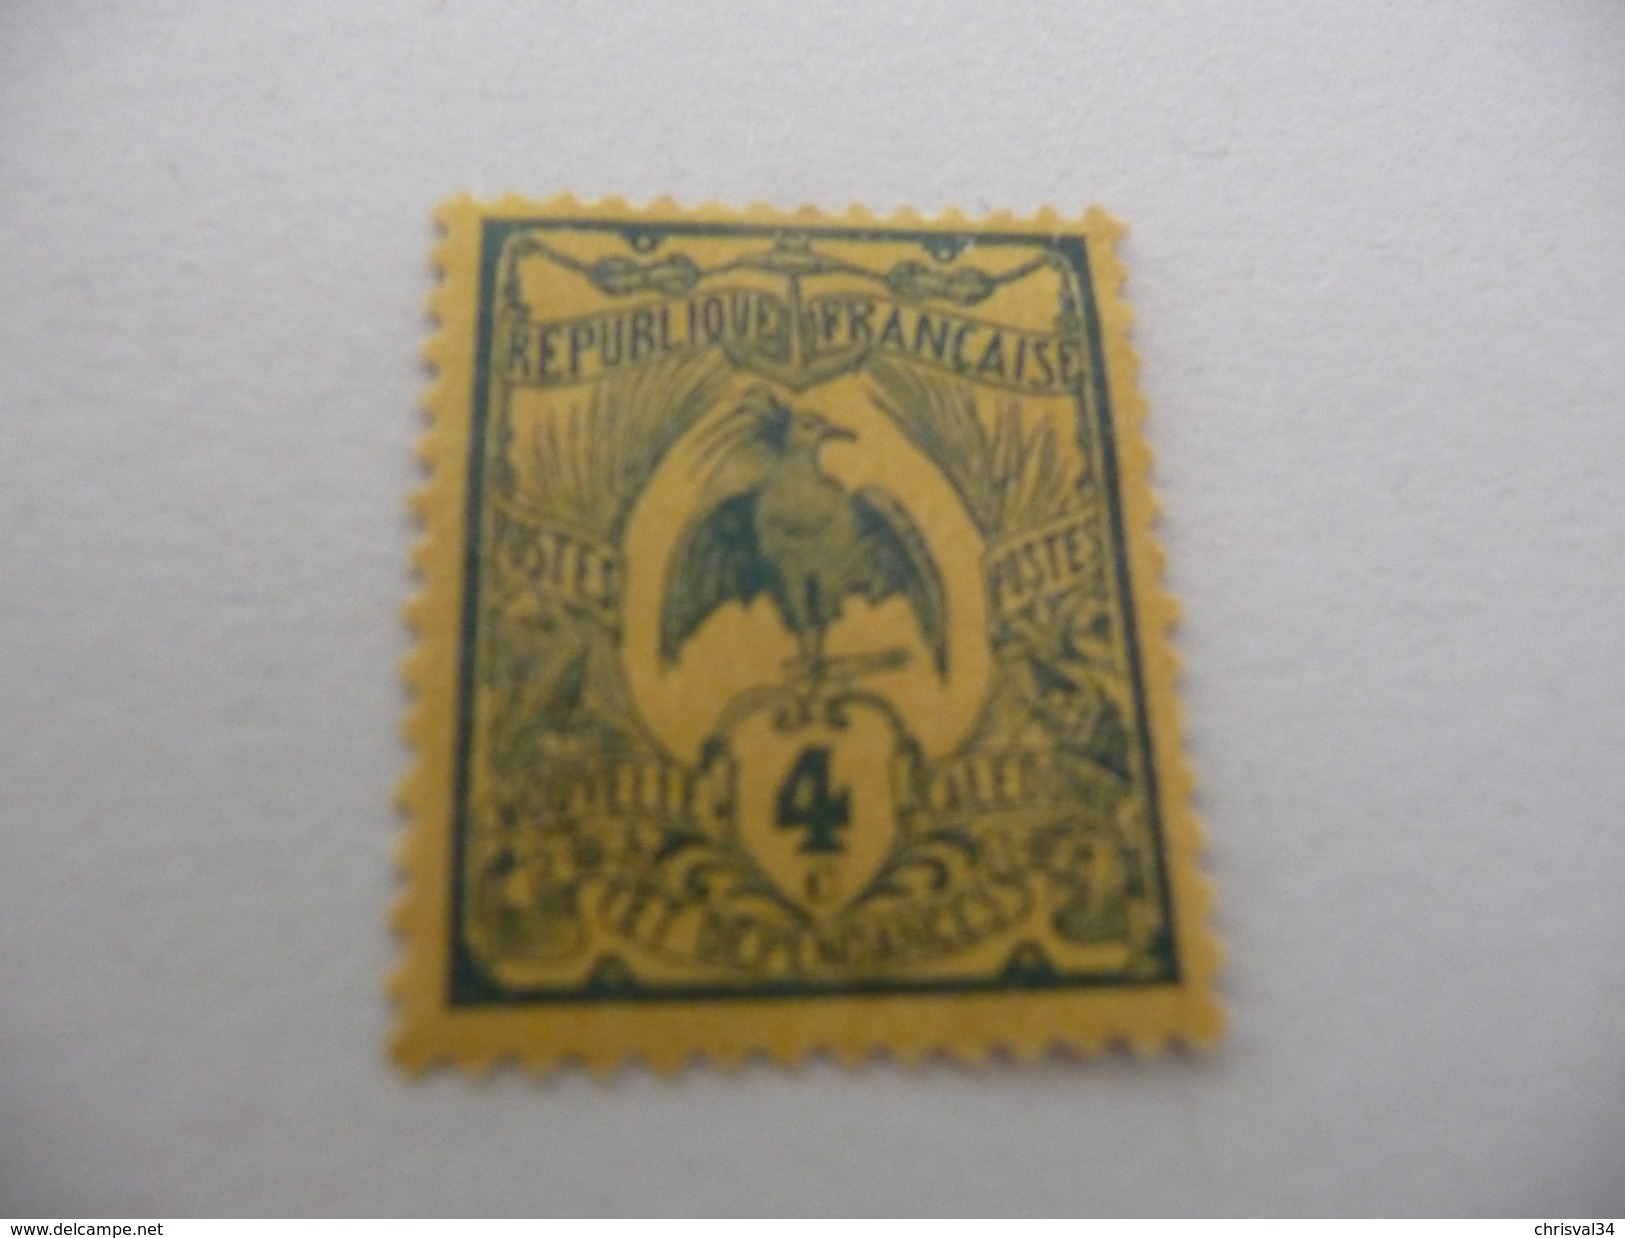 TIMBRE  NOUVELLE-CALEDONIE     N  90    NEUF  TRACE  CHARNIERE - Neufs